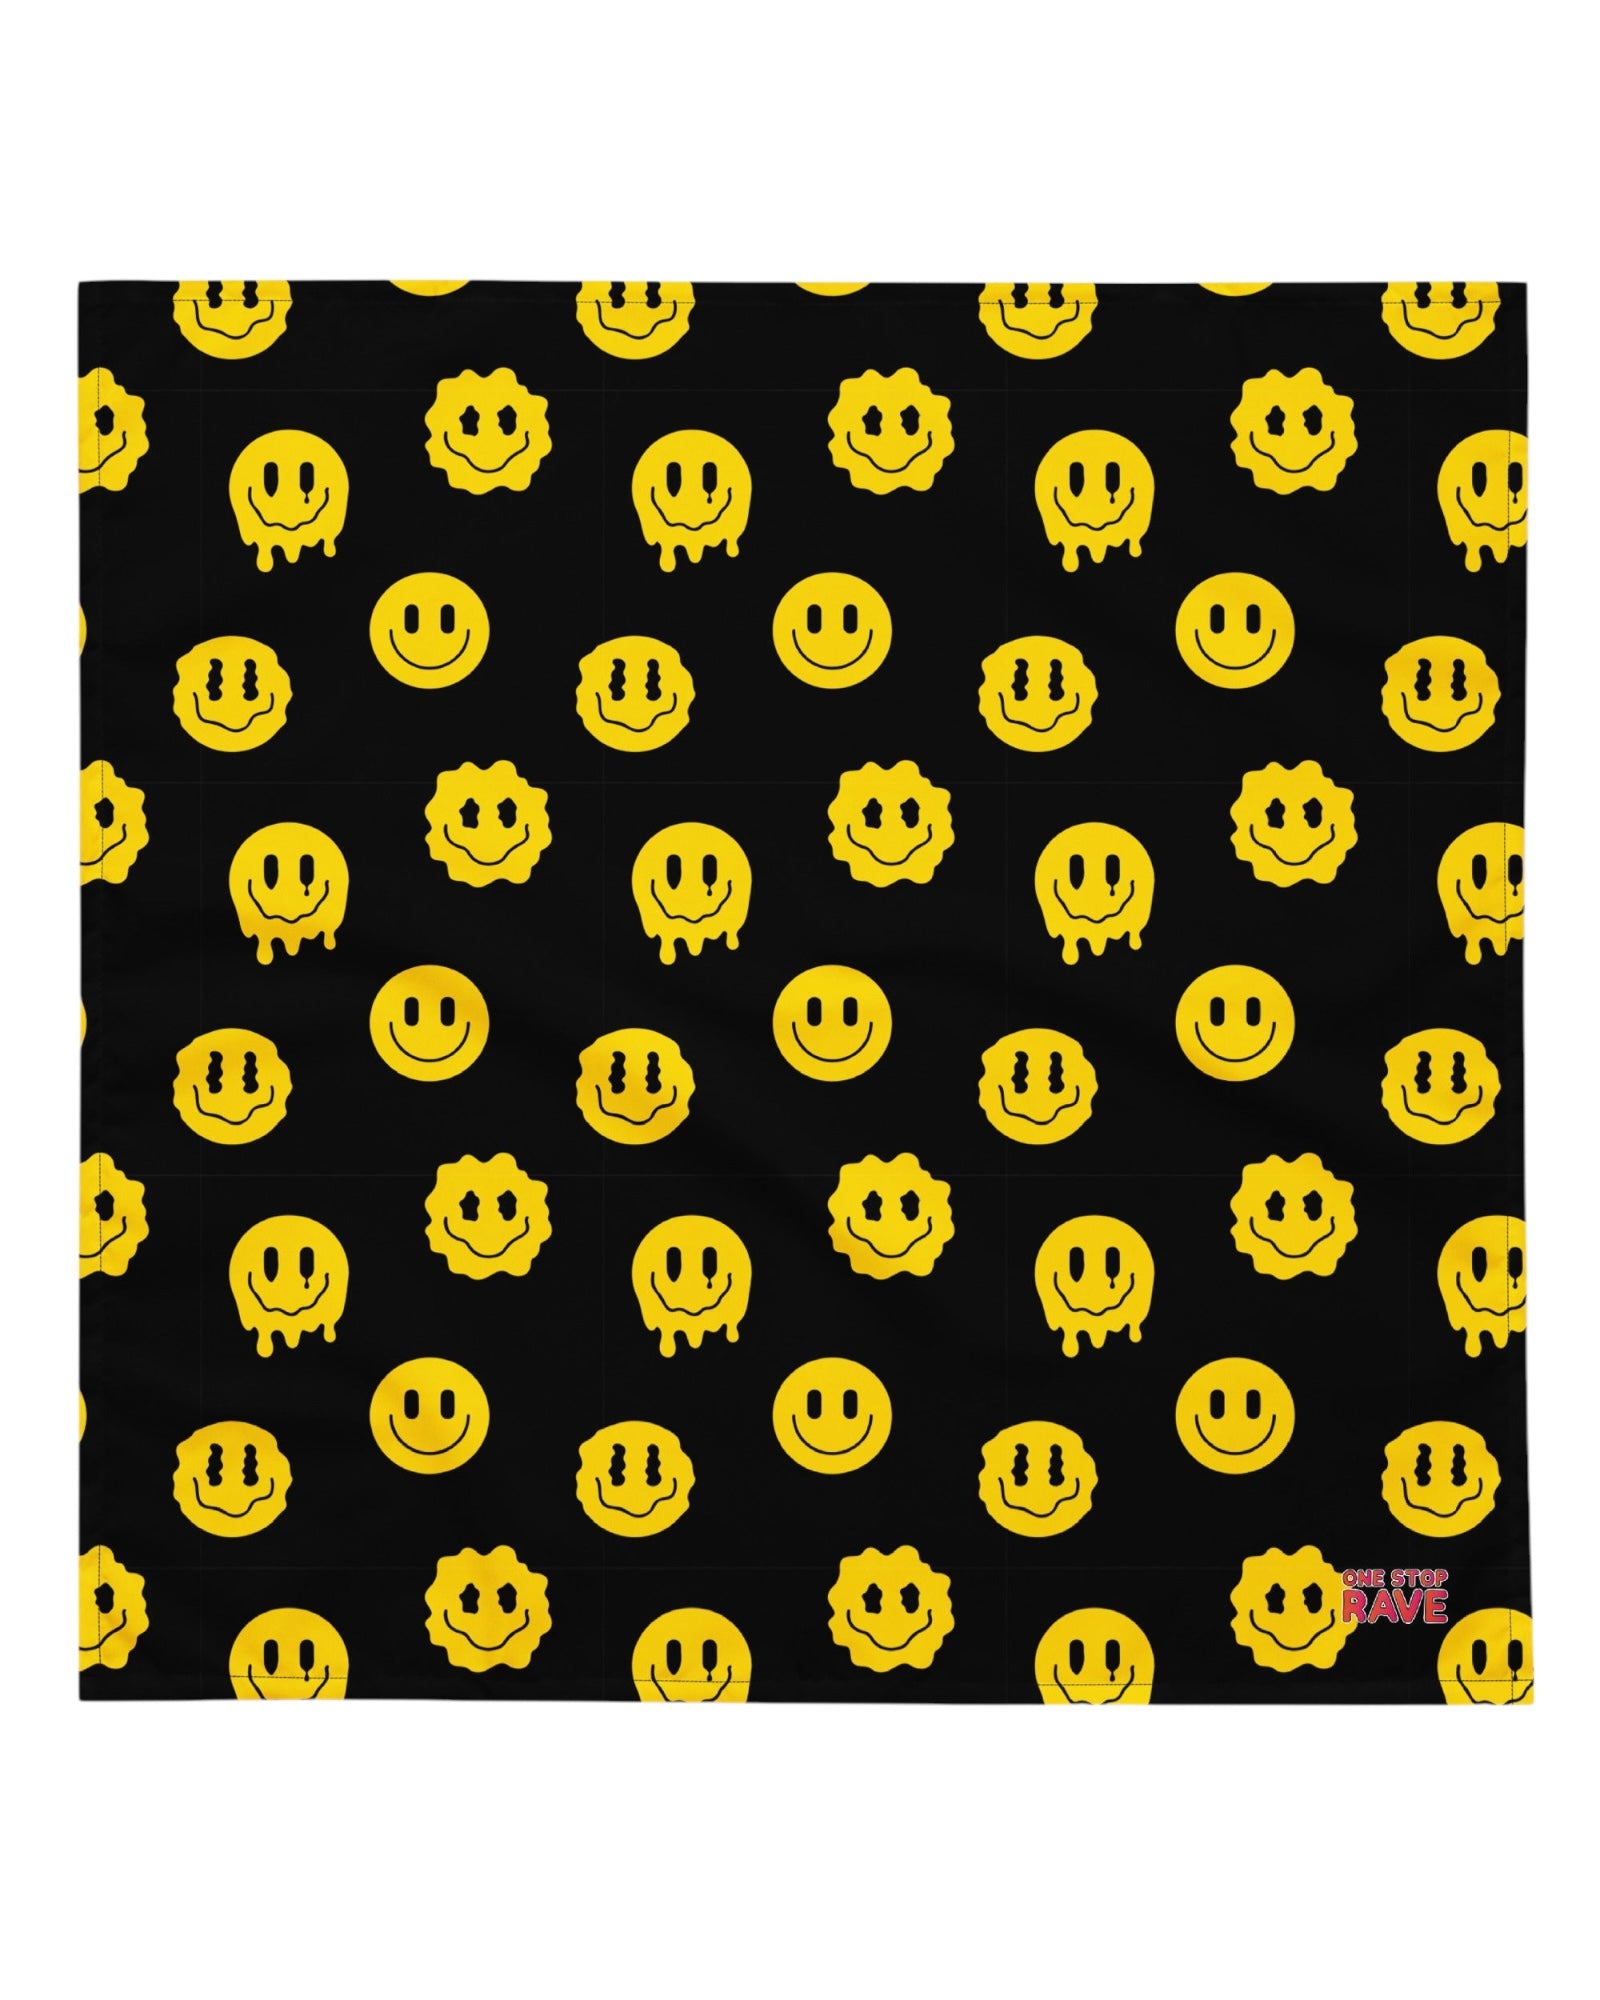 Close-up of the Trippie Bandana with yellow smiley faces - The pattern shows various smiley face expressions, adding a playful vibe to rave outfits